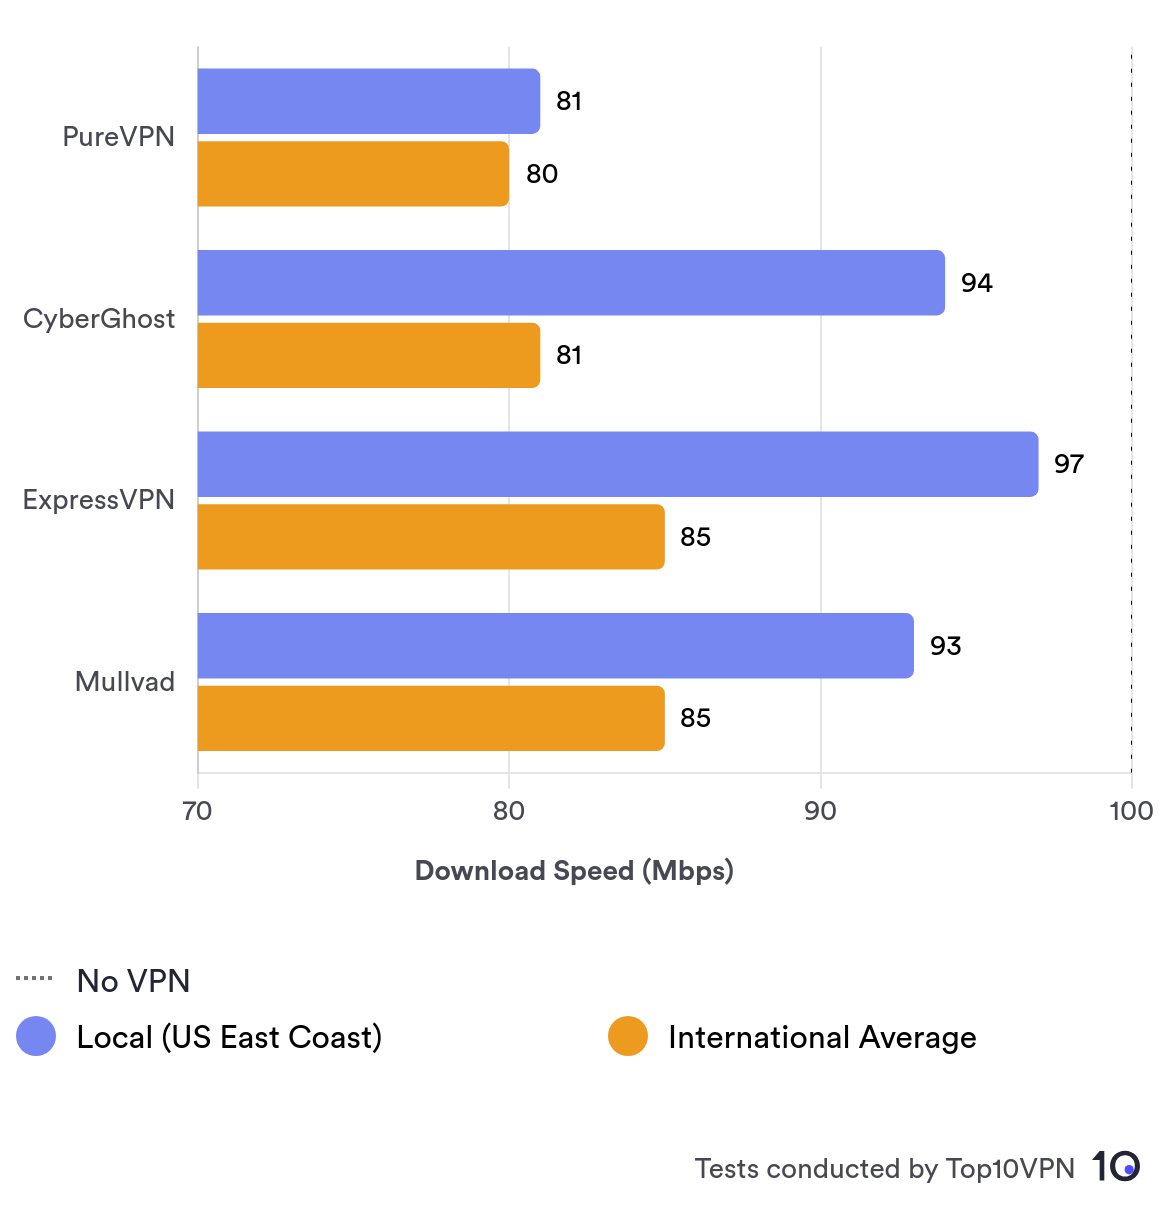 Bar Chart Comparing PureVPN's Local and International Speeds to Other Leading VPN Services.